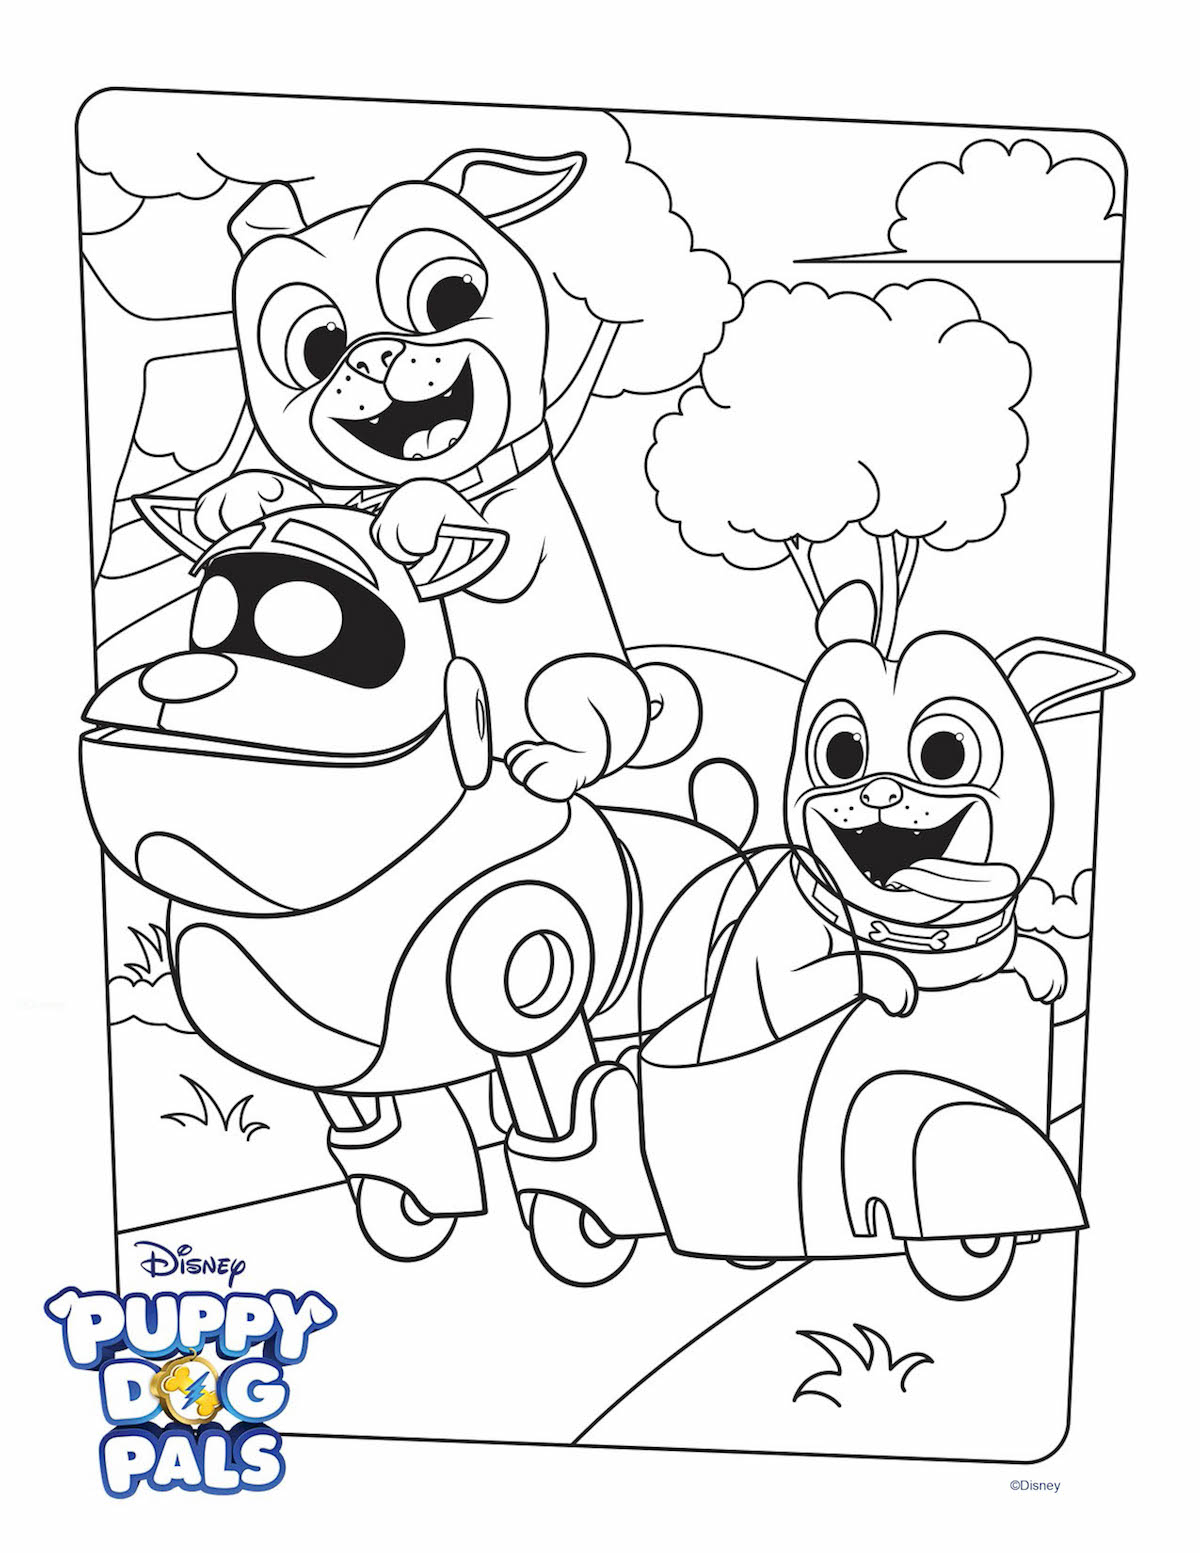 Little Puppy Coloring Pages Puppy Dog Pals Coloring Page Activity Disney Family